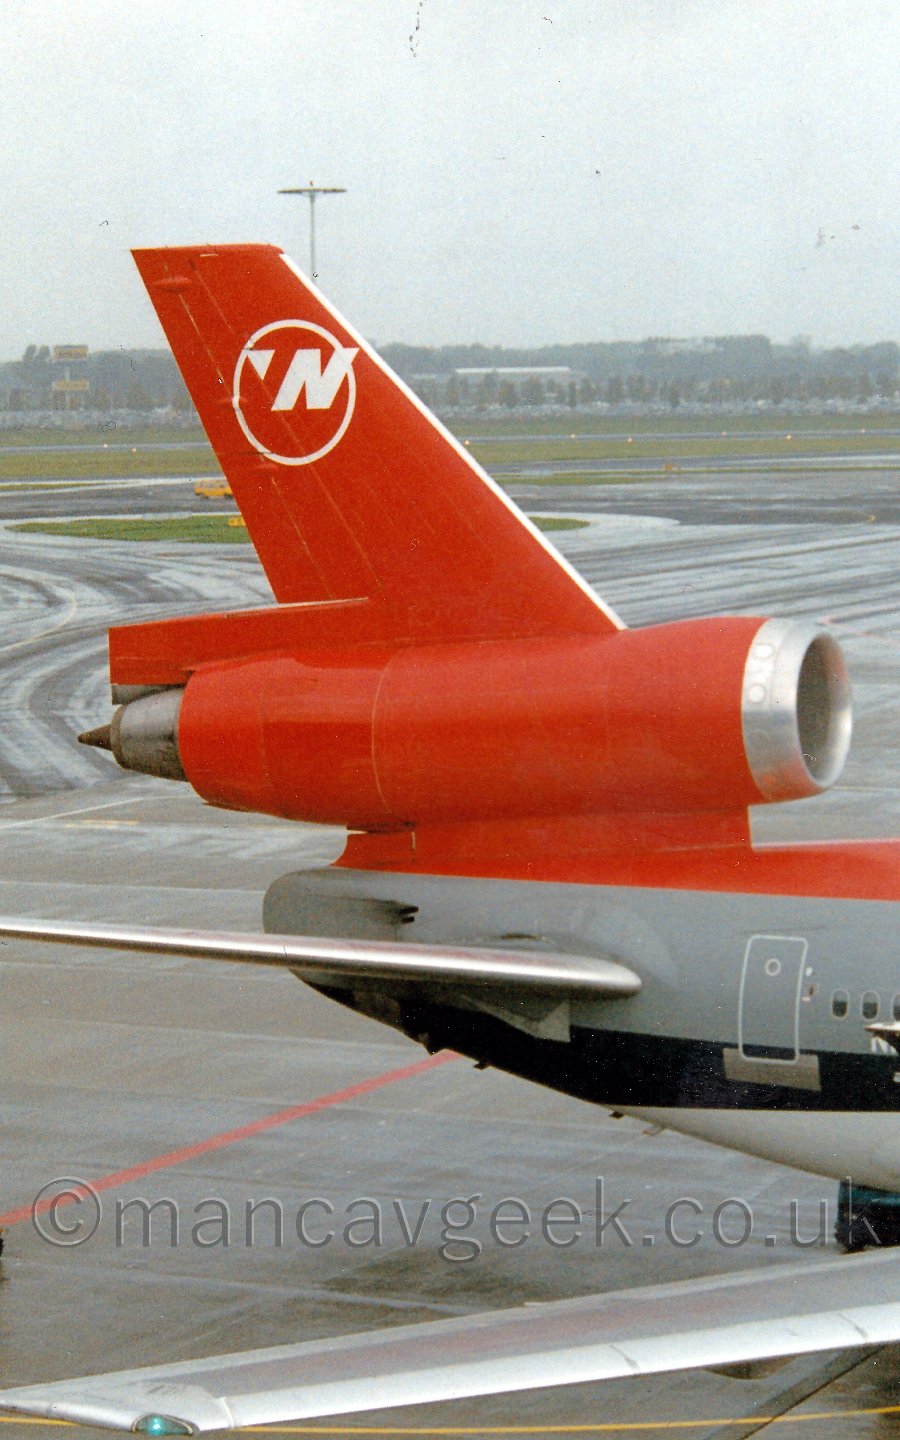 Closeup of the tail of a three engined jet airliner parked facing to the right. The plane has a red top, with a white belly, and a thick grey and black stripe running along the body. The tail is red, with the white outline of a circle, with a white letter "N" overlaid i the top right, and a white triangle pointing to the NorthWest in the top left. In the background, black taxiways fill most of the frame, with grass beyond that leading to trees in the distance, slowly vanishing in to mist.